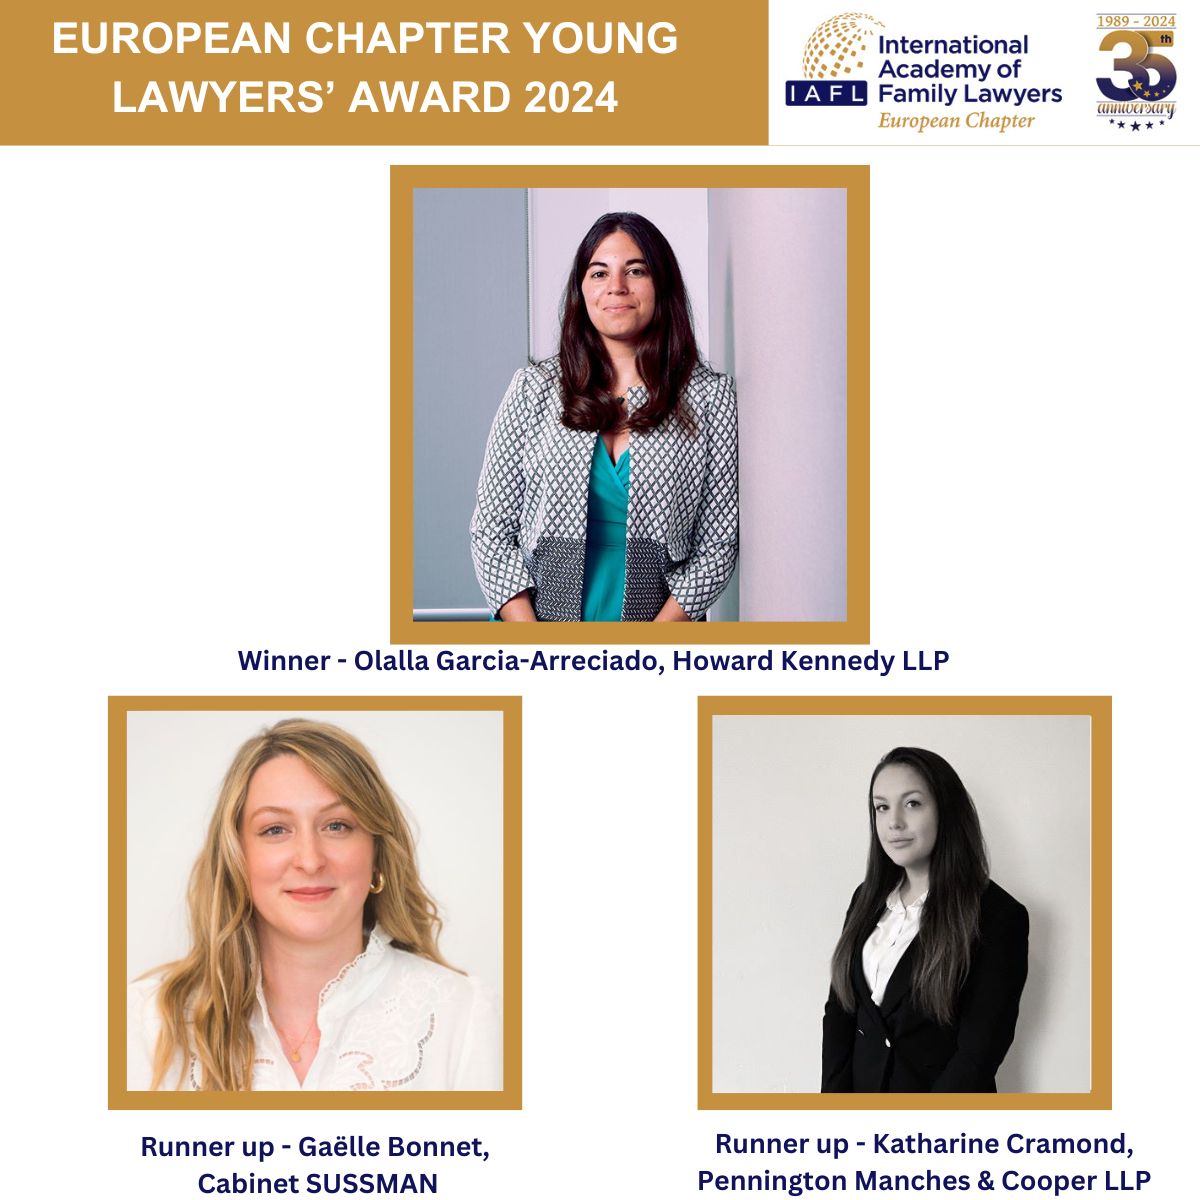 @IAFL_FamLaw is delighted to announce Olalla García-Arreciado, England as the winner of the 12th IAFL EC Young Lawyers' Awards 2024. Two runners up were Gaëlle Bonnet, Cabinet Sussman, France and Katharine Cramond, England iafl.com/news/2024/winn…